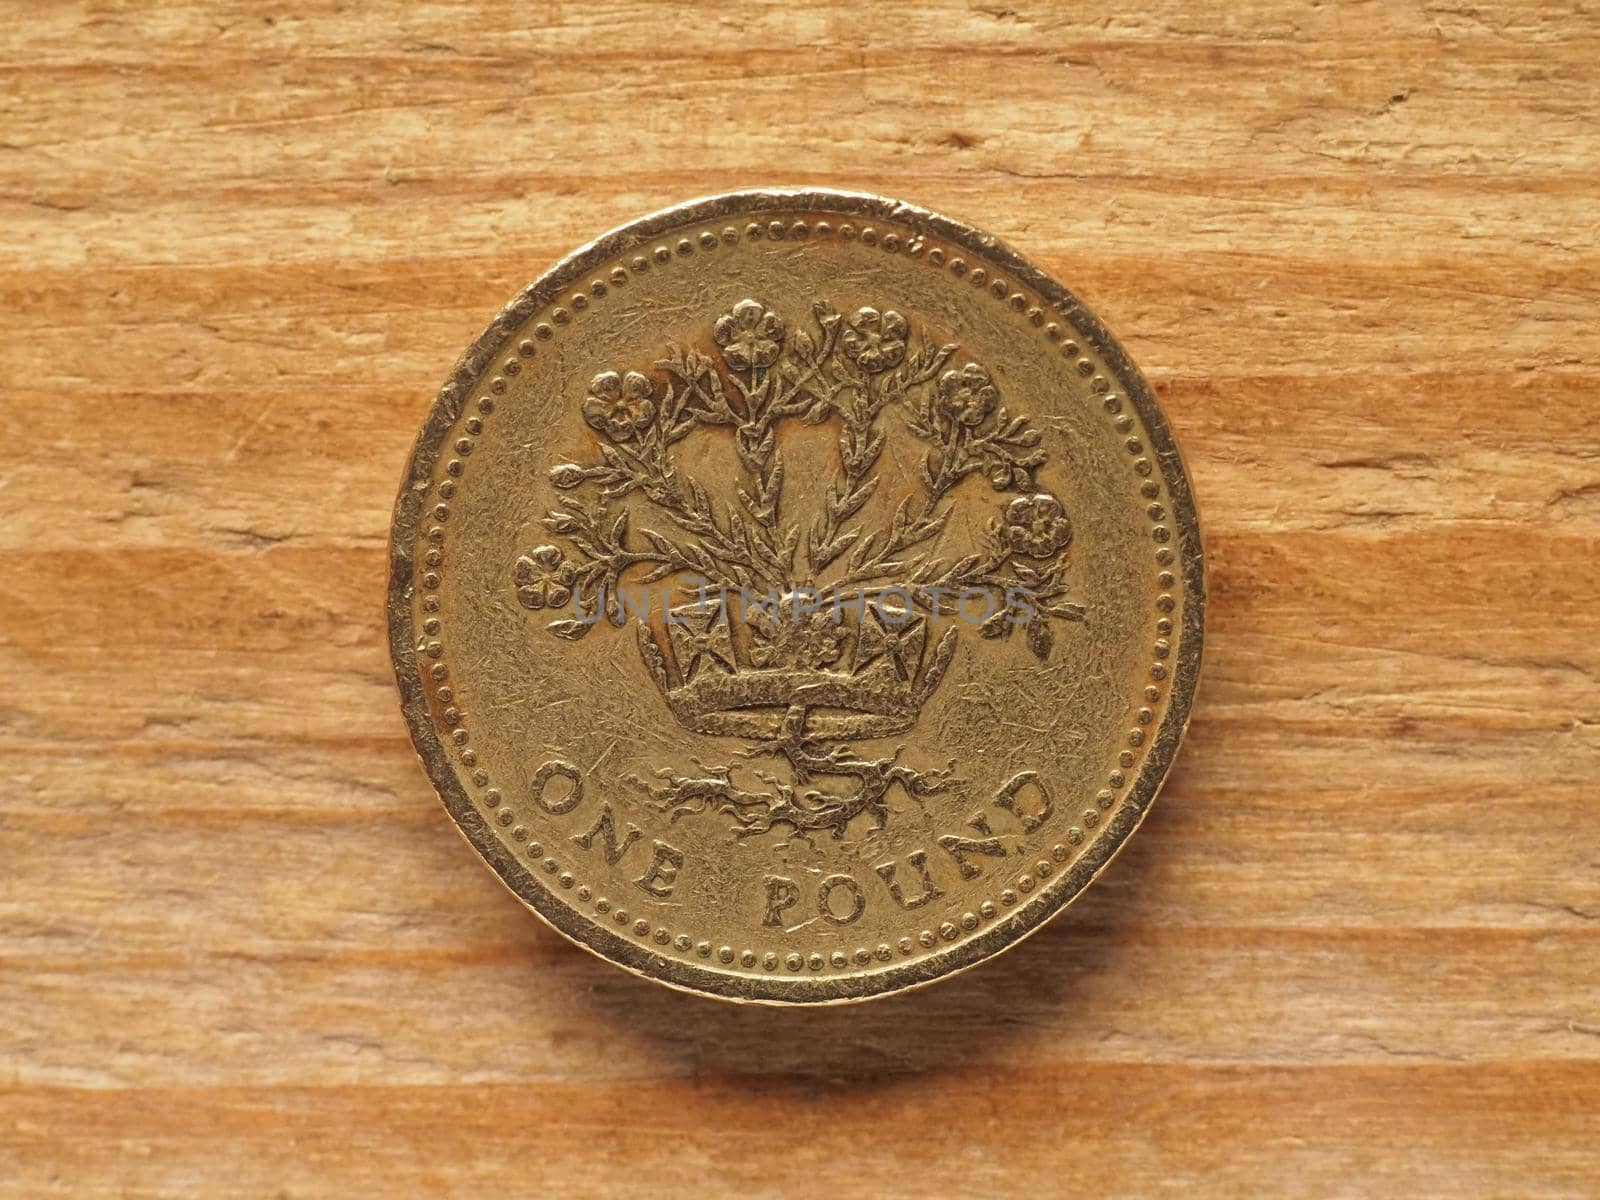 one pound coin reverse side showing flax plant and diadem representing Northern Ireland, currency of the United Kingdom